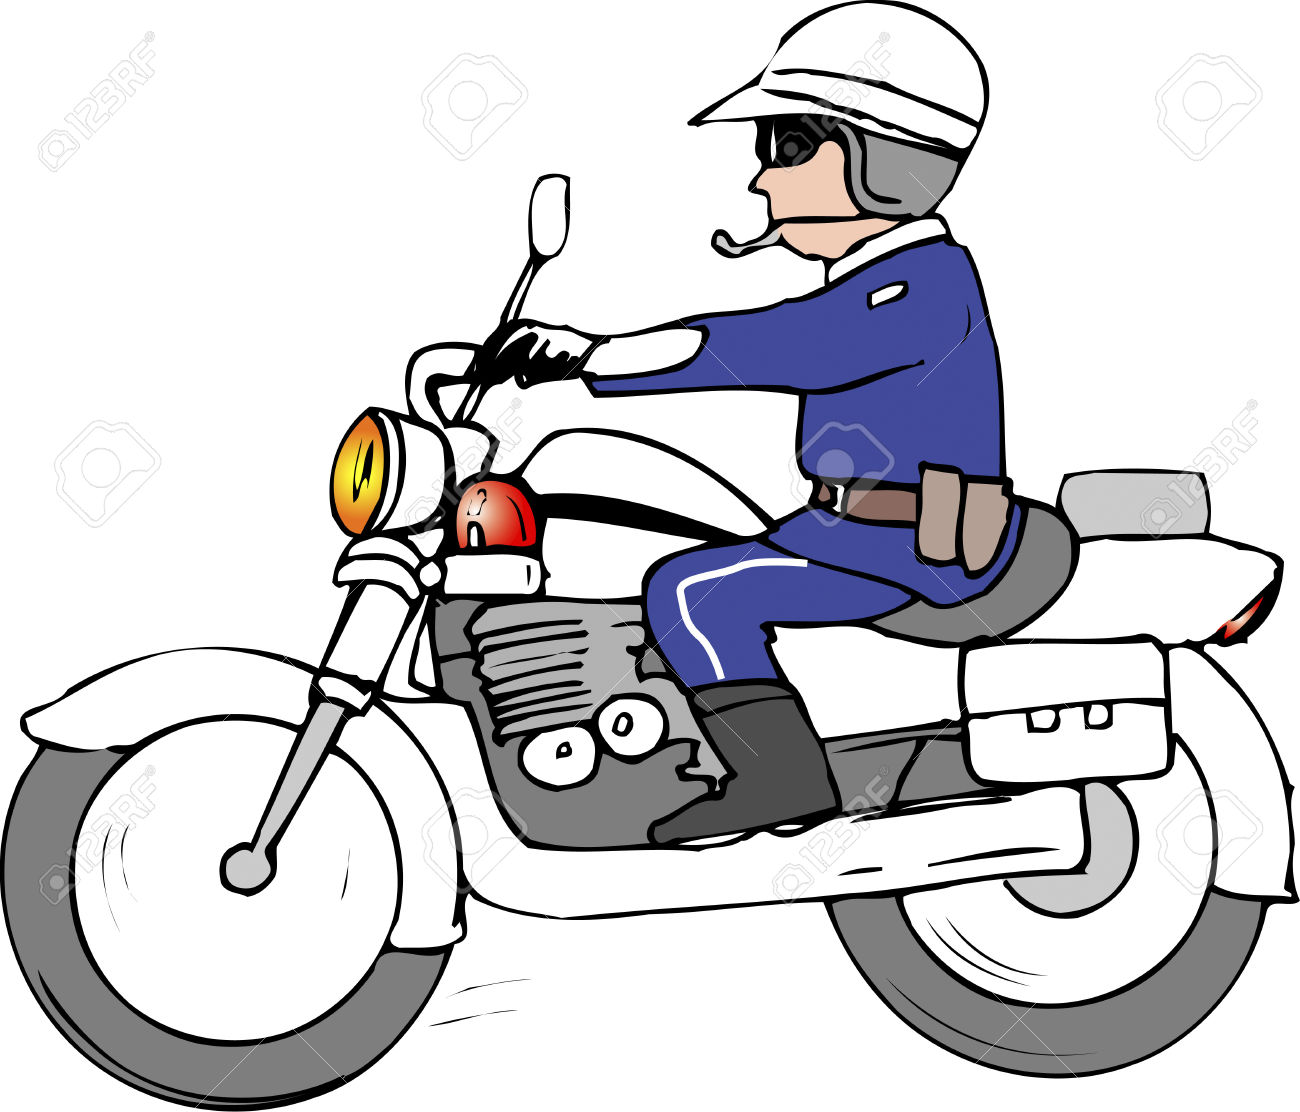 Police Motorcycle Team Stock Photo, Picture And Royalty Free Image.